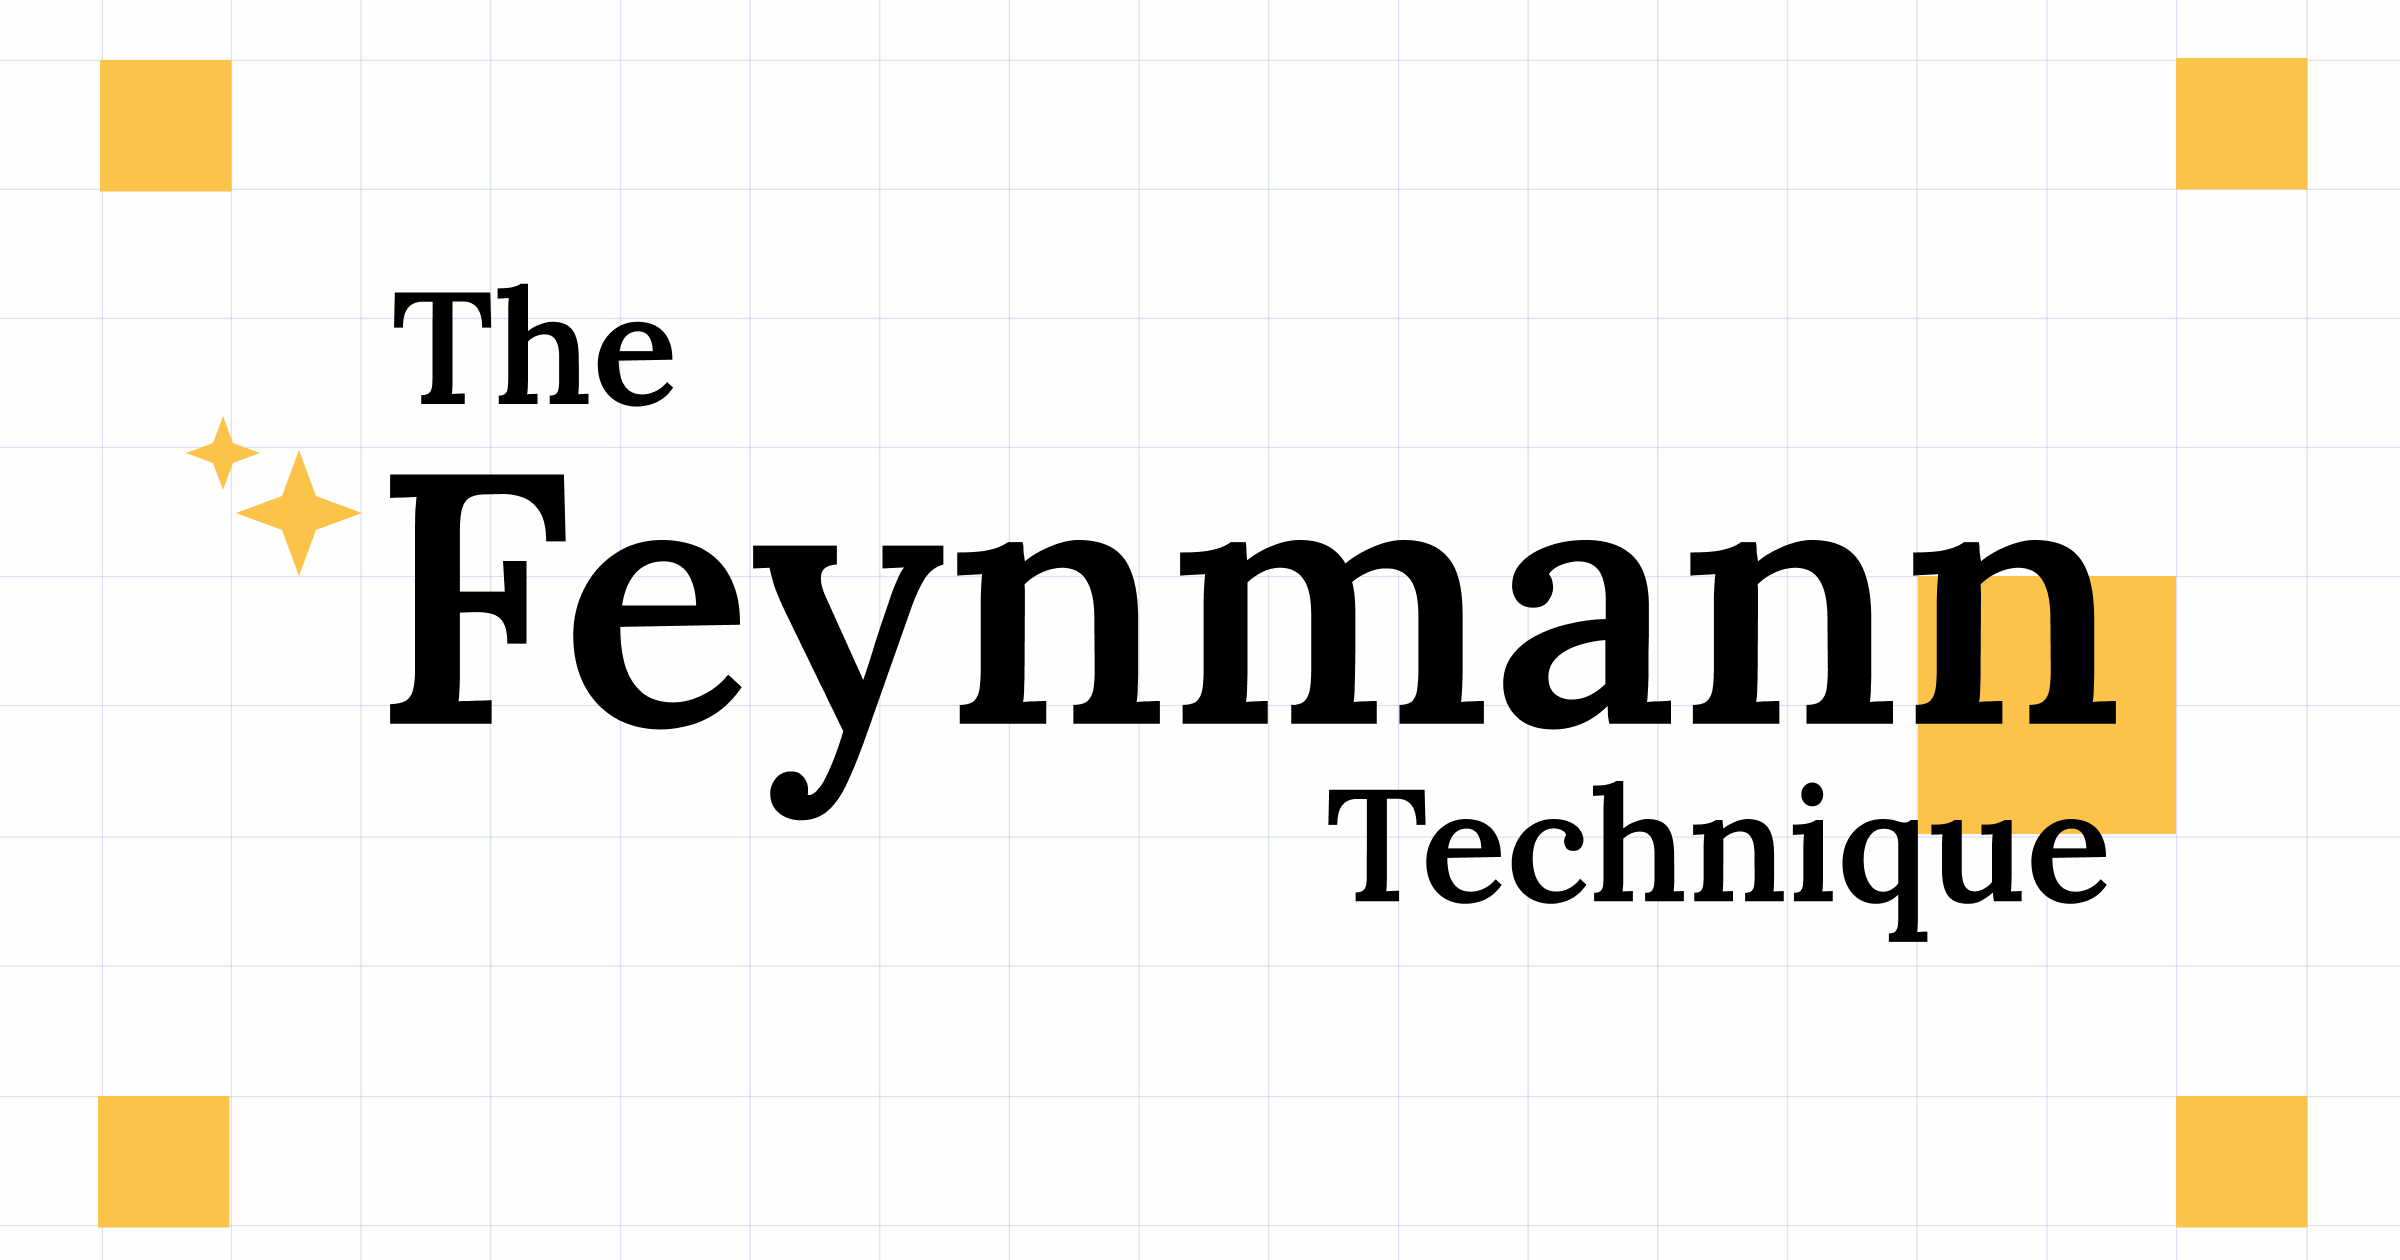 The Feynman learning Technique: A Systematic Way to Learn New Technologies